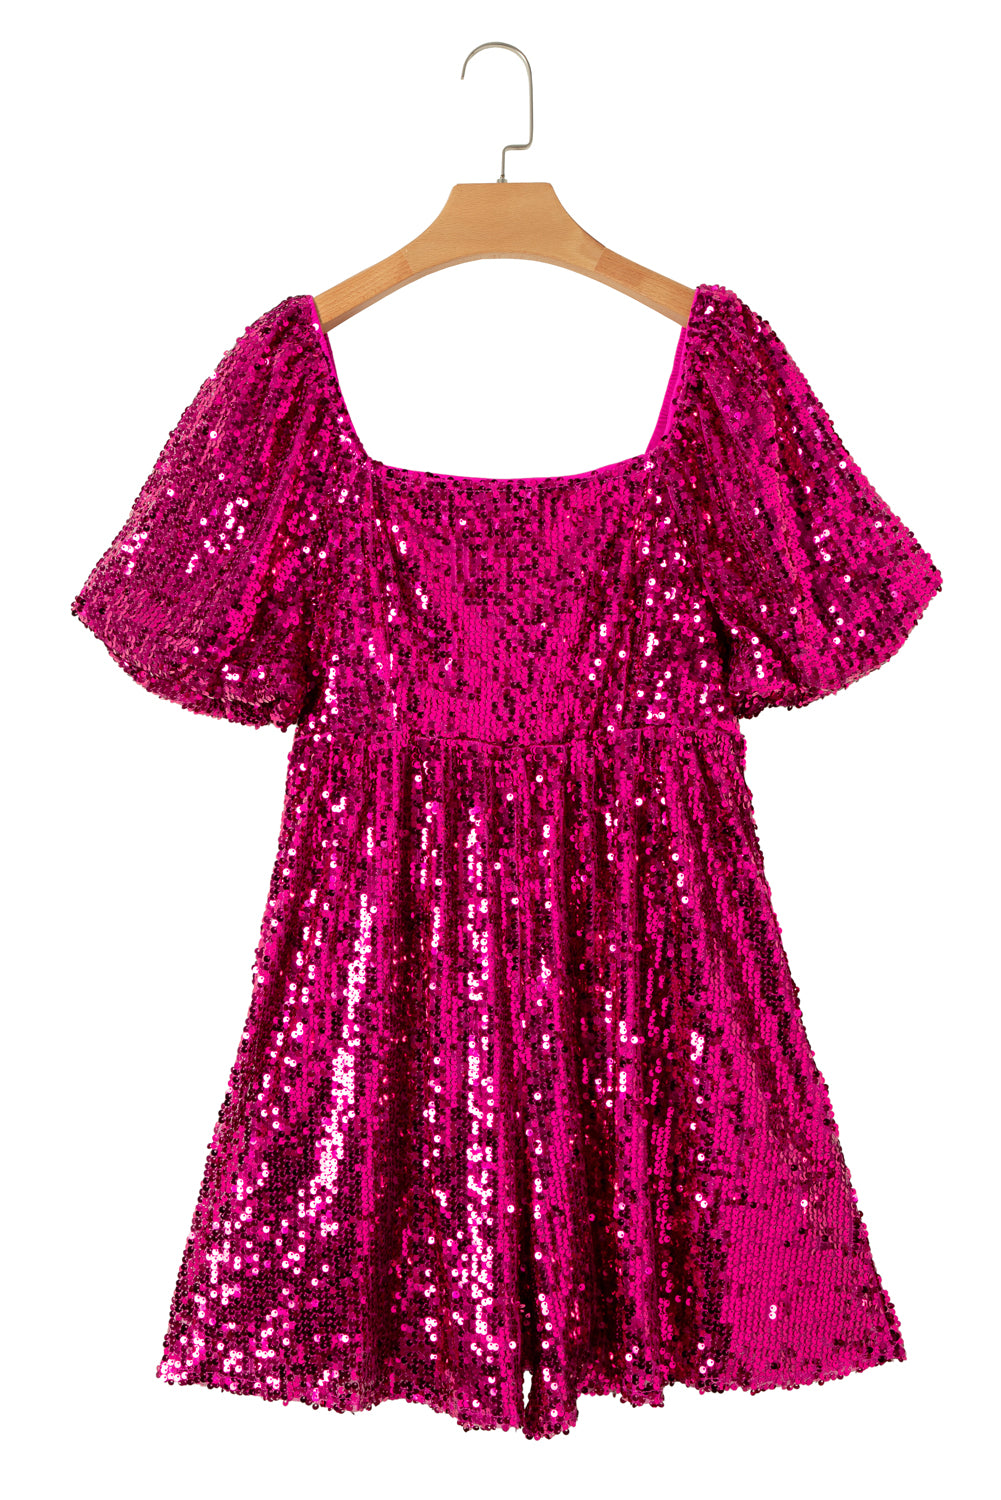 Rose Red Short Puff Sleeve Sequin Babydoll Romper